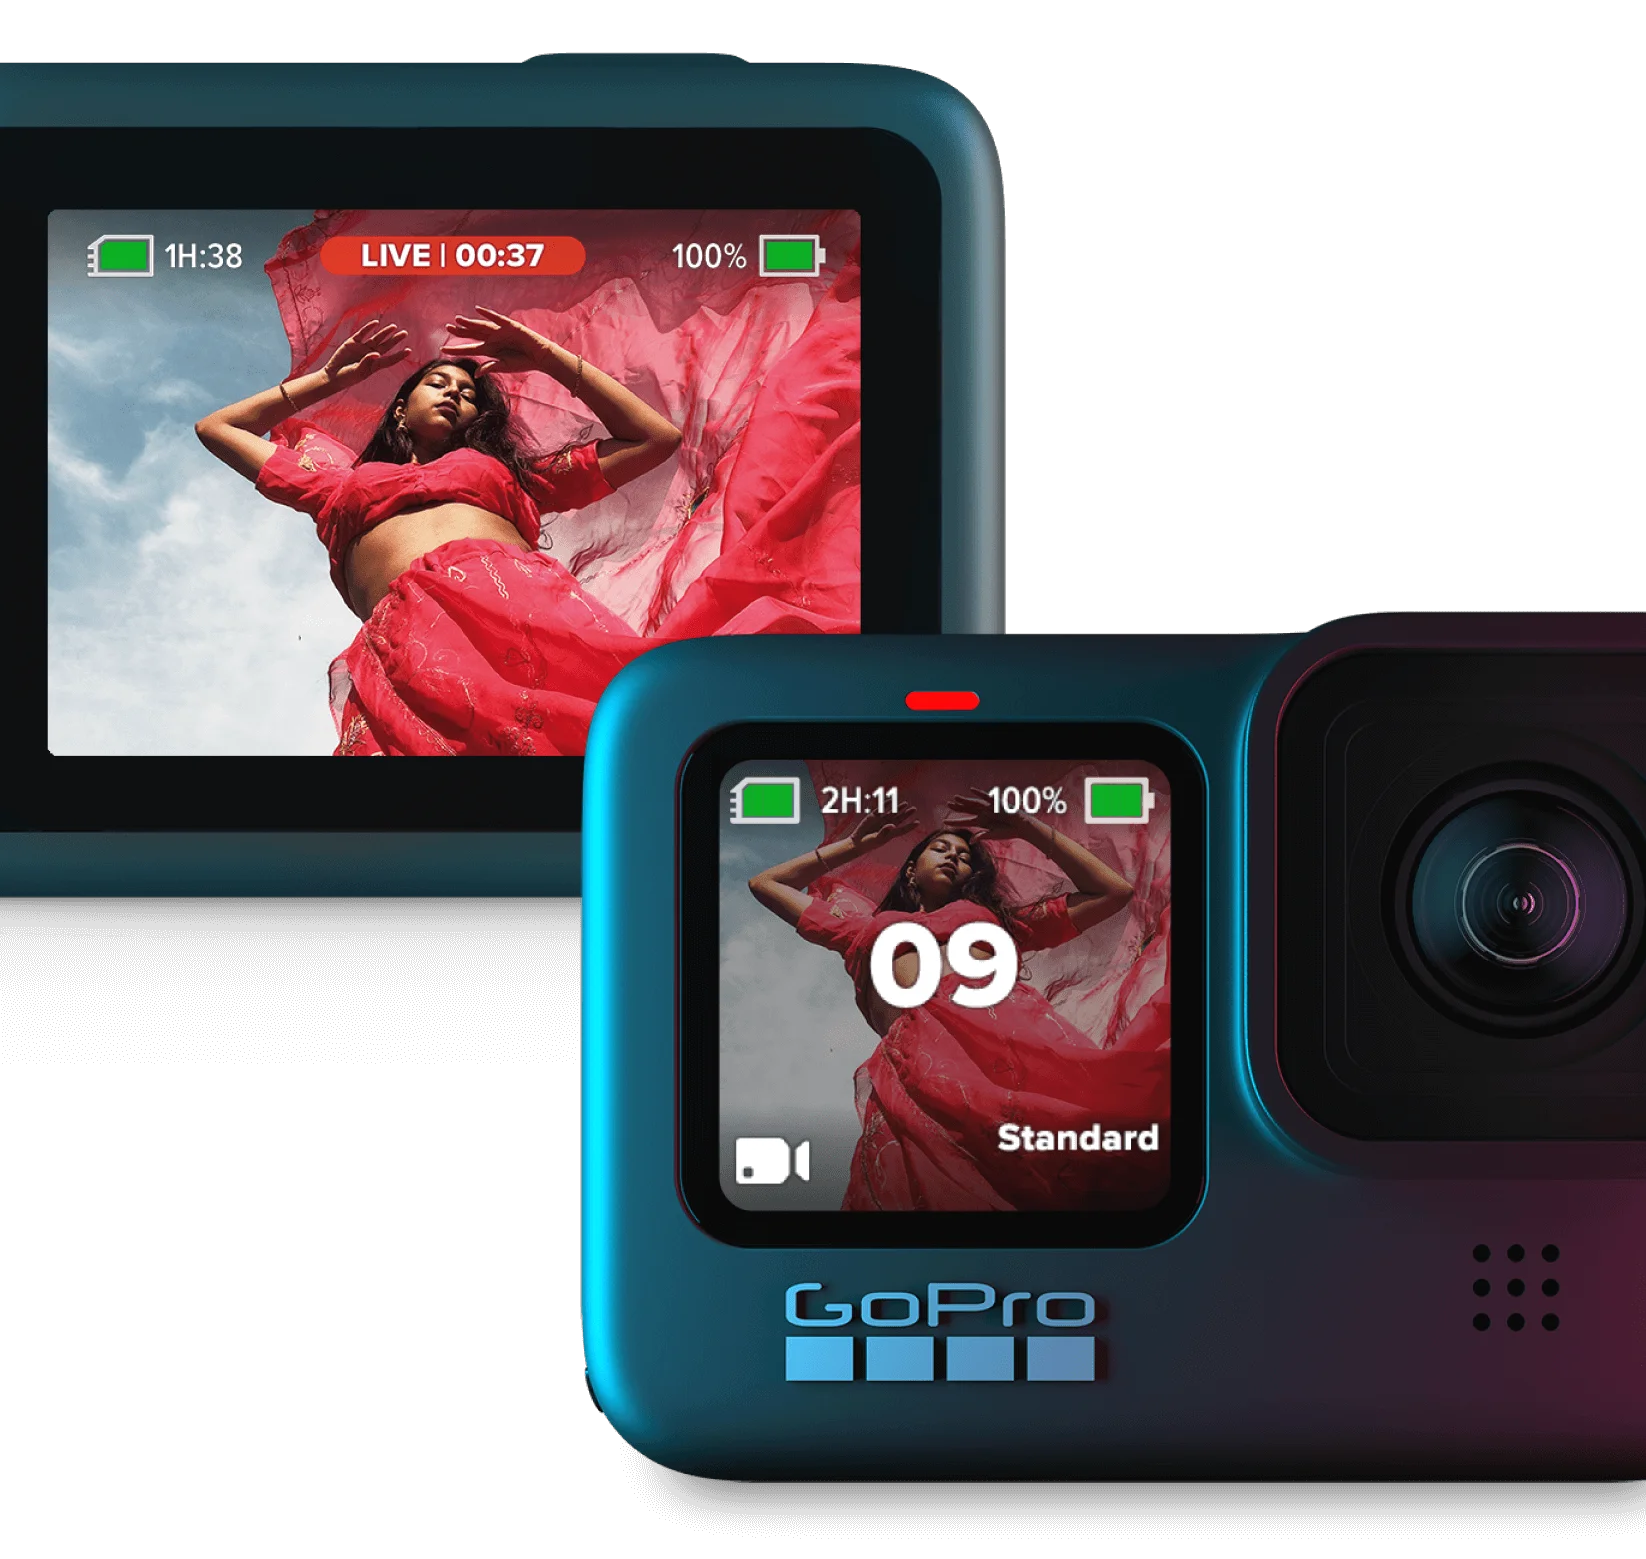 Gopro Hero 9 Black Launches For Us 449 99 With New Gopro Mods And A Host Of Changes Notebookcheck Net News